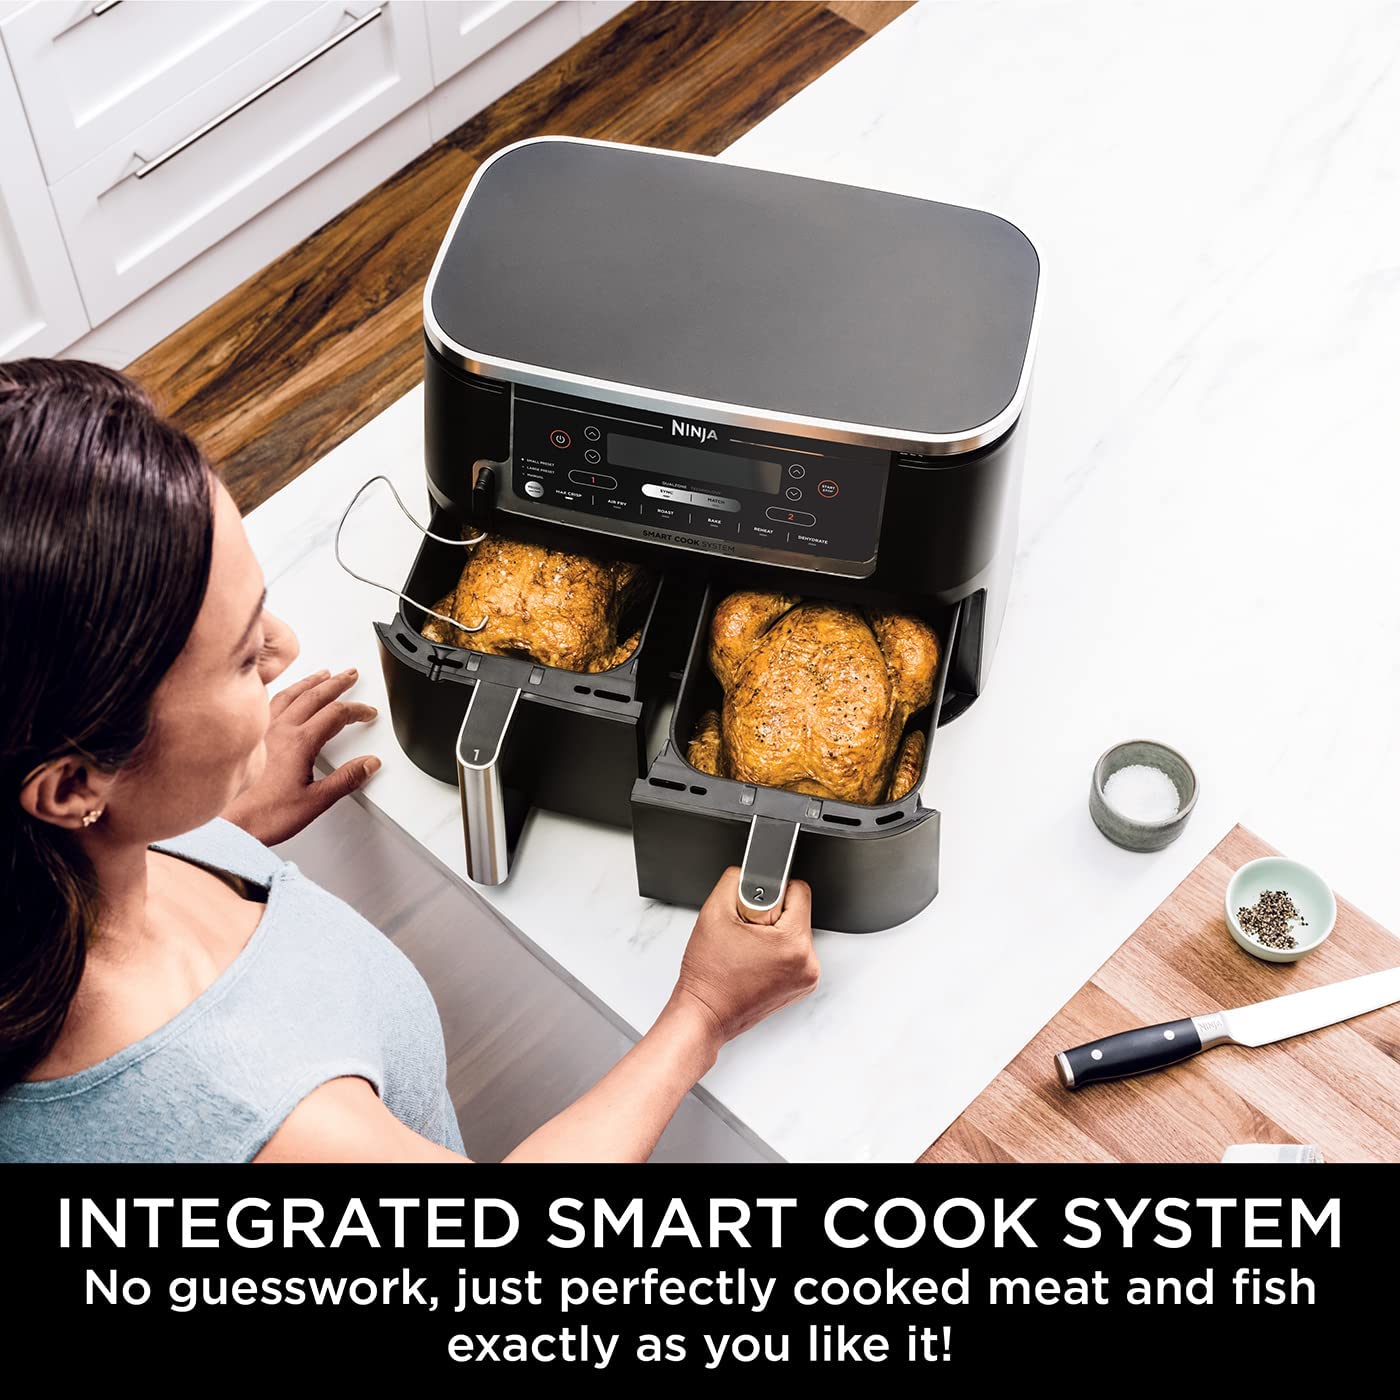 Ninja Foodi MAX Dual Zone Air Fryer with Smart Cook System